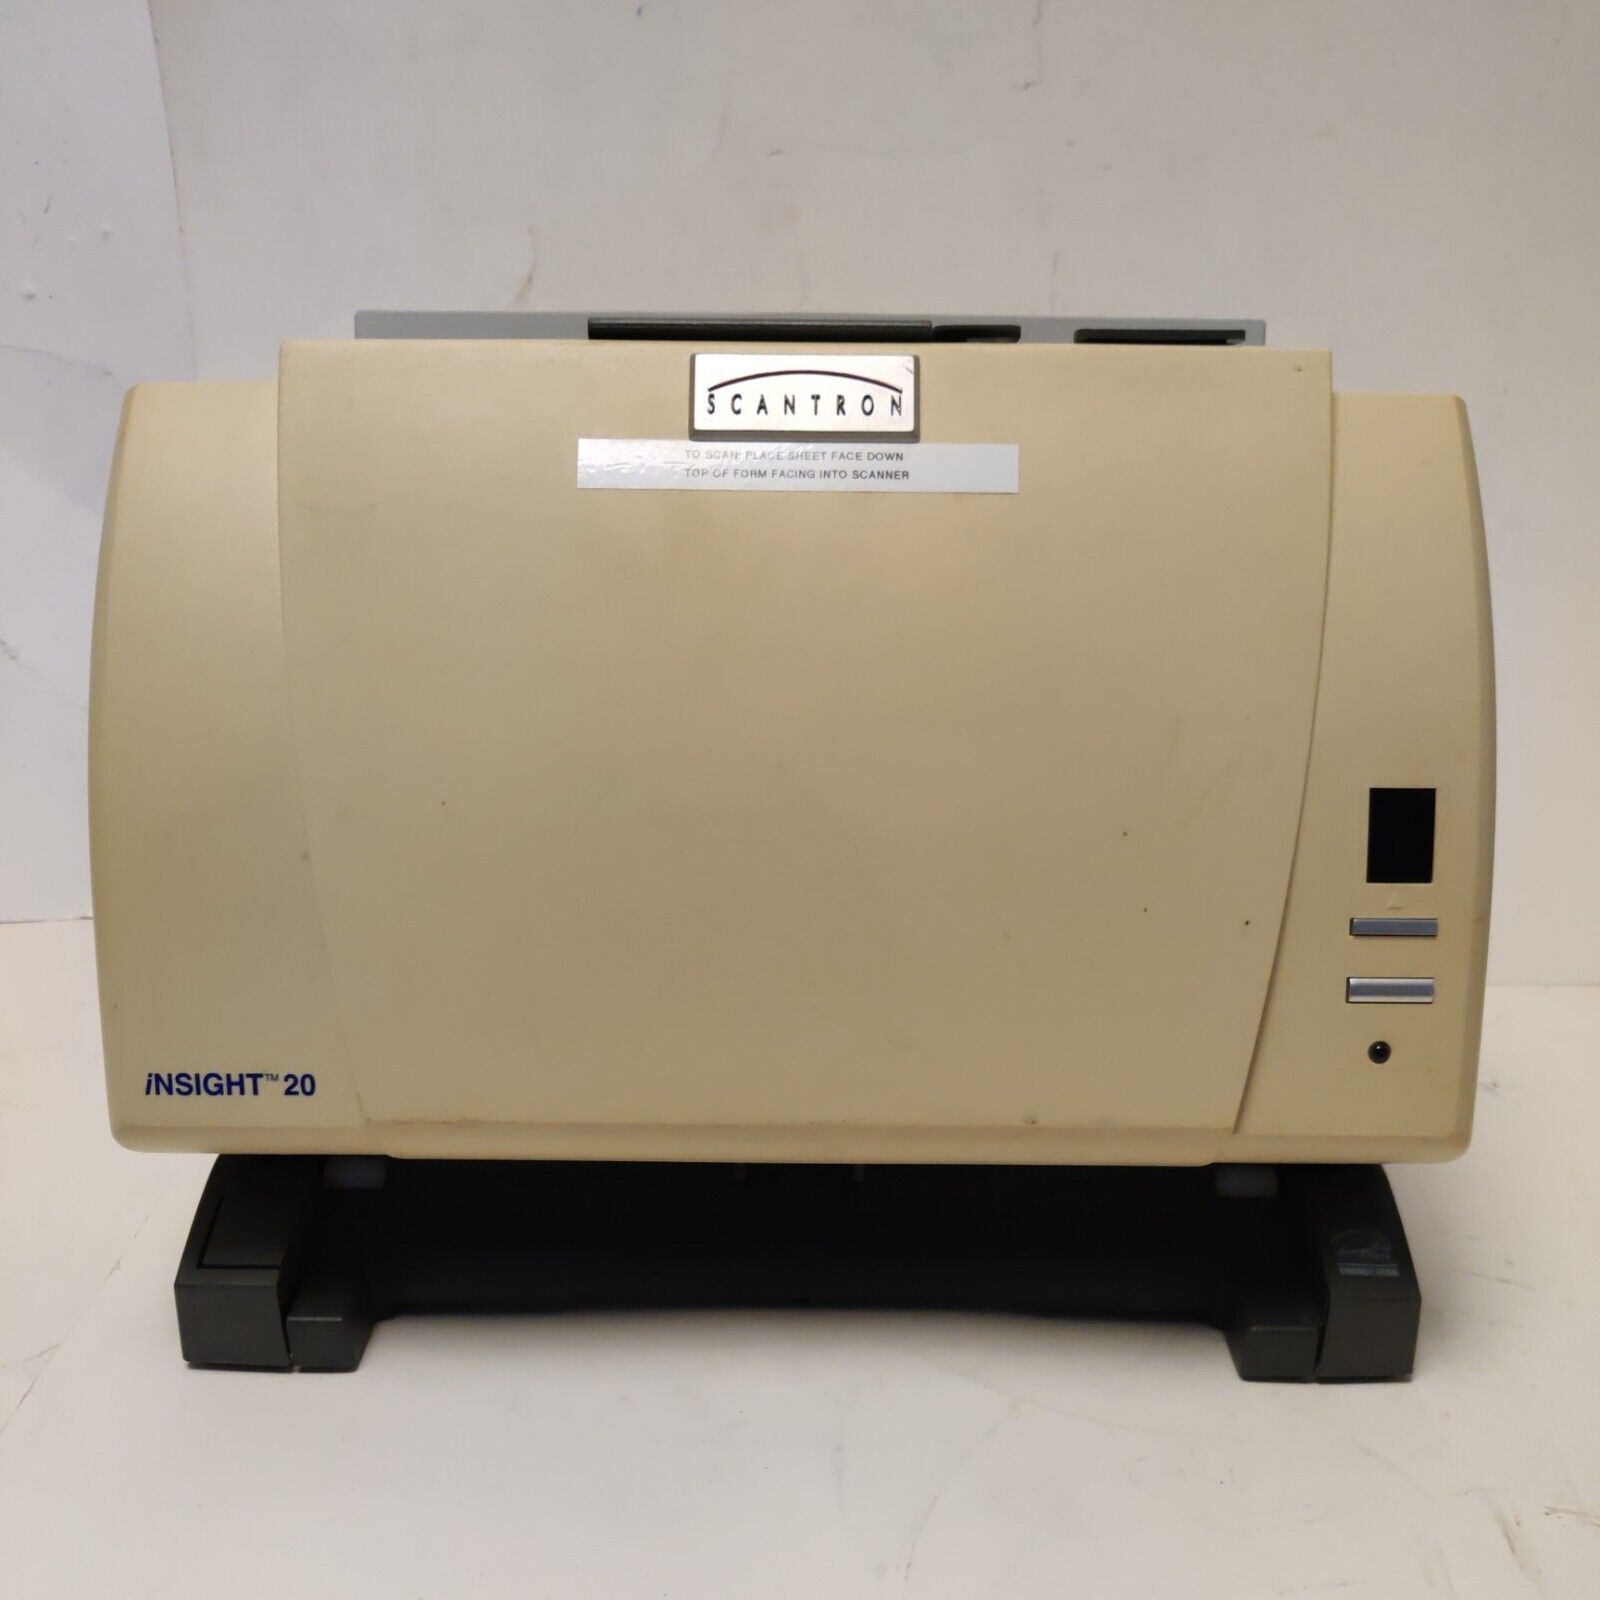 Scantron Insight 20 Scanner 